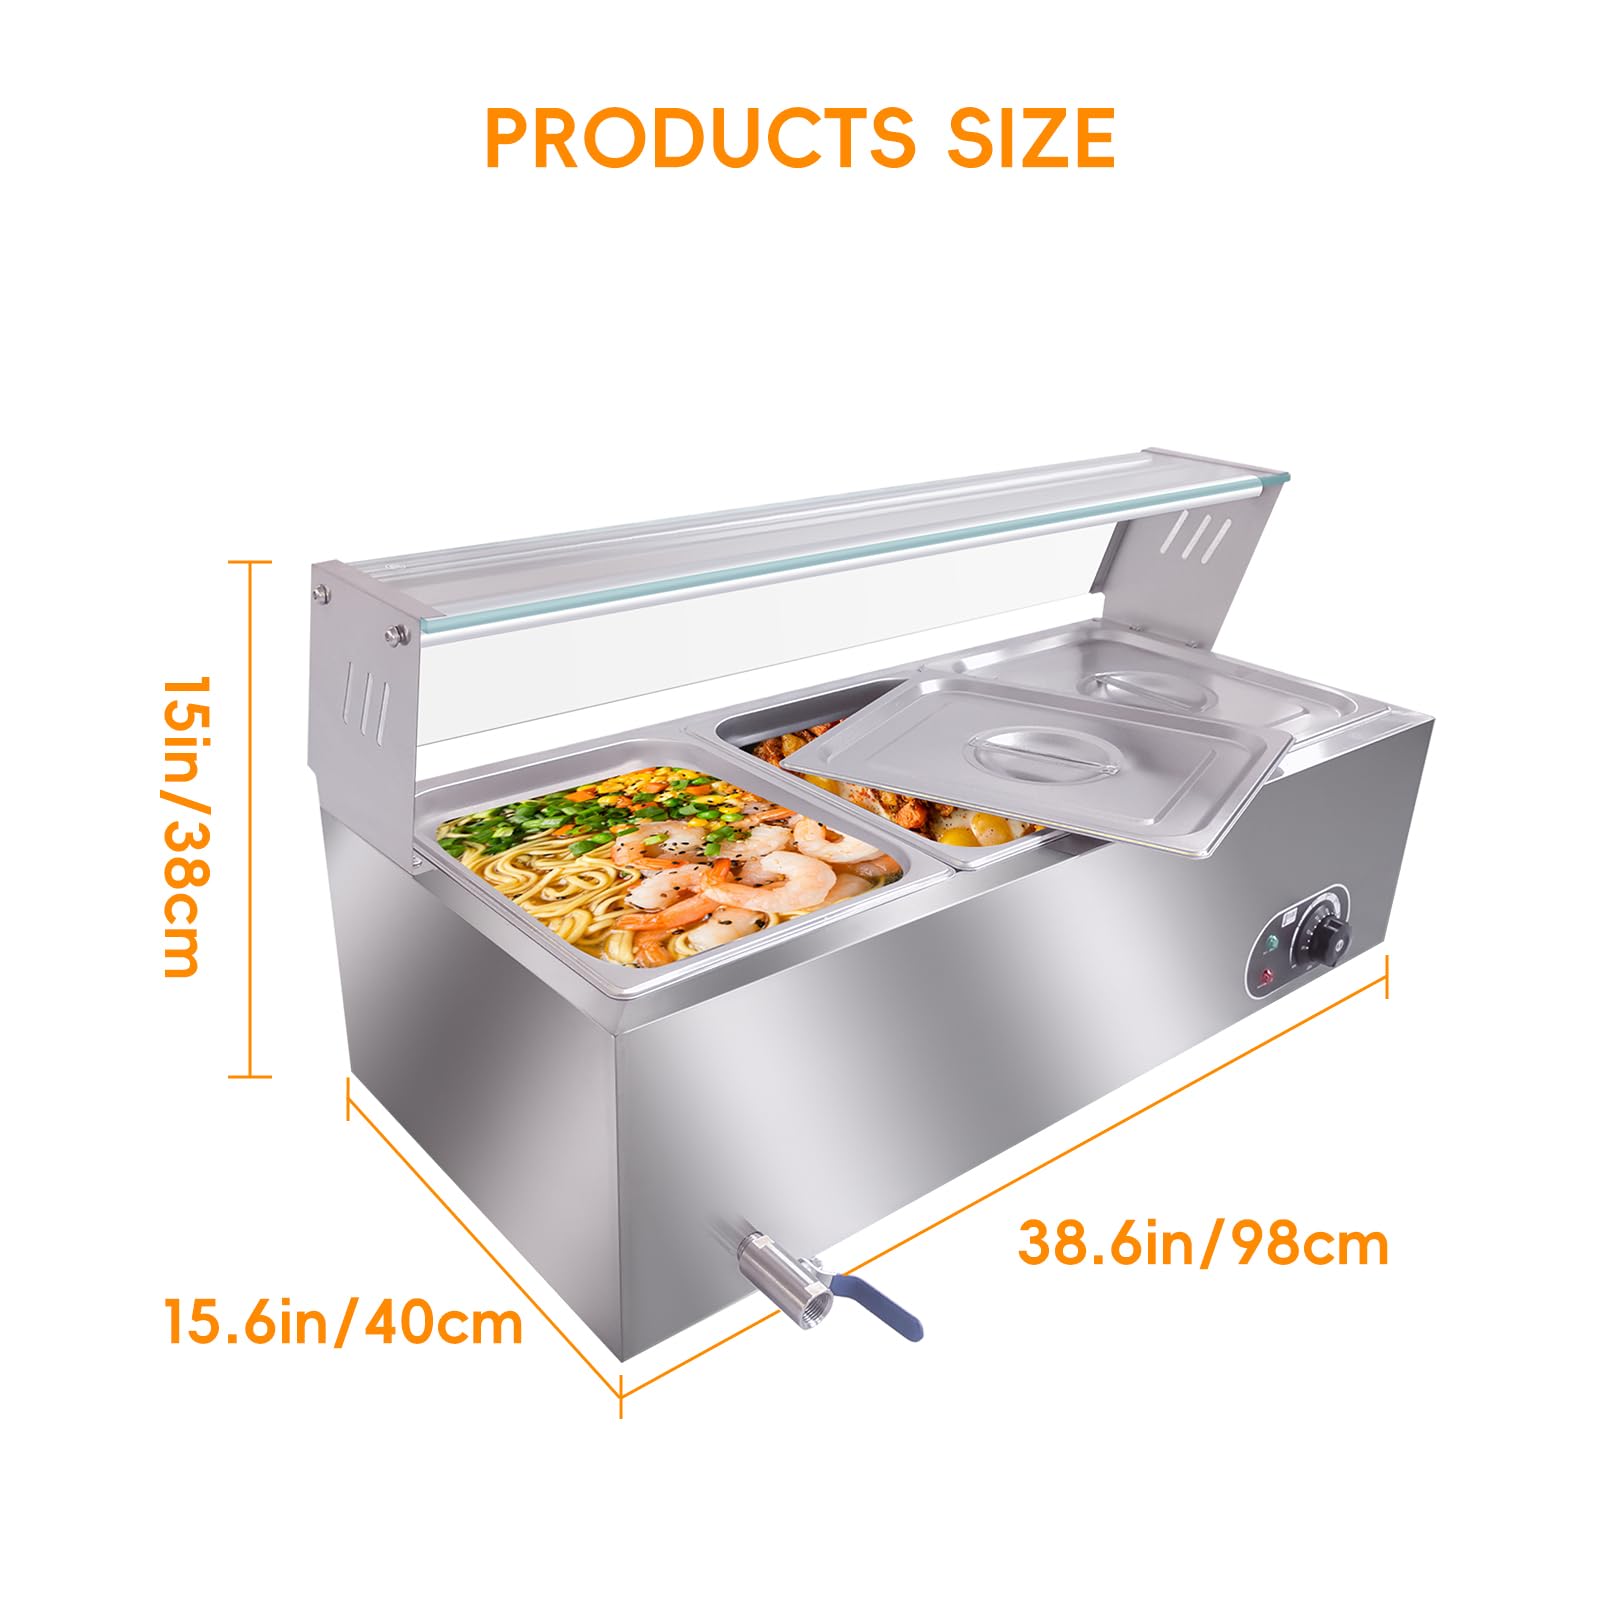 Commercial Food Warmer, 120 Qt Electric Bain Marie with 6 Inch Deep Pans,Steam Table with Tempered Glass Cover, 1500W Countertop Stainless Steel Buffet Bain Marie 86-185°F Temp Control